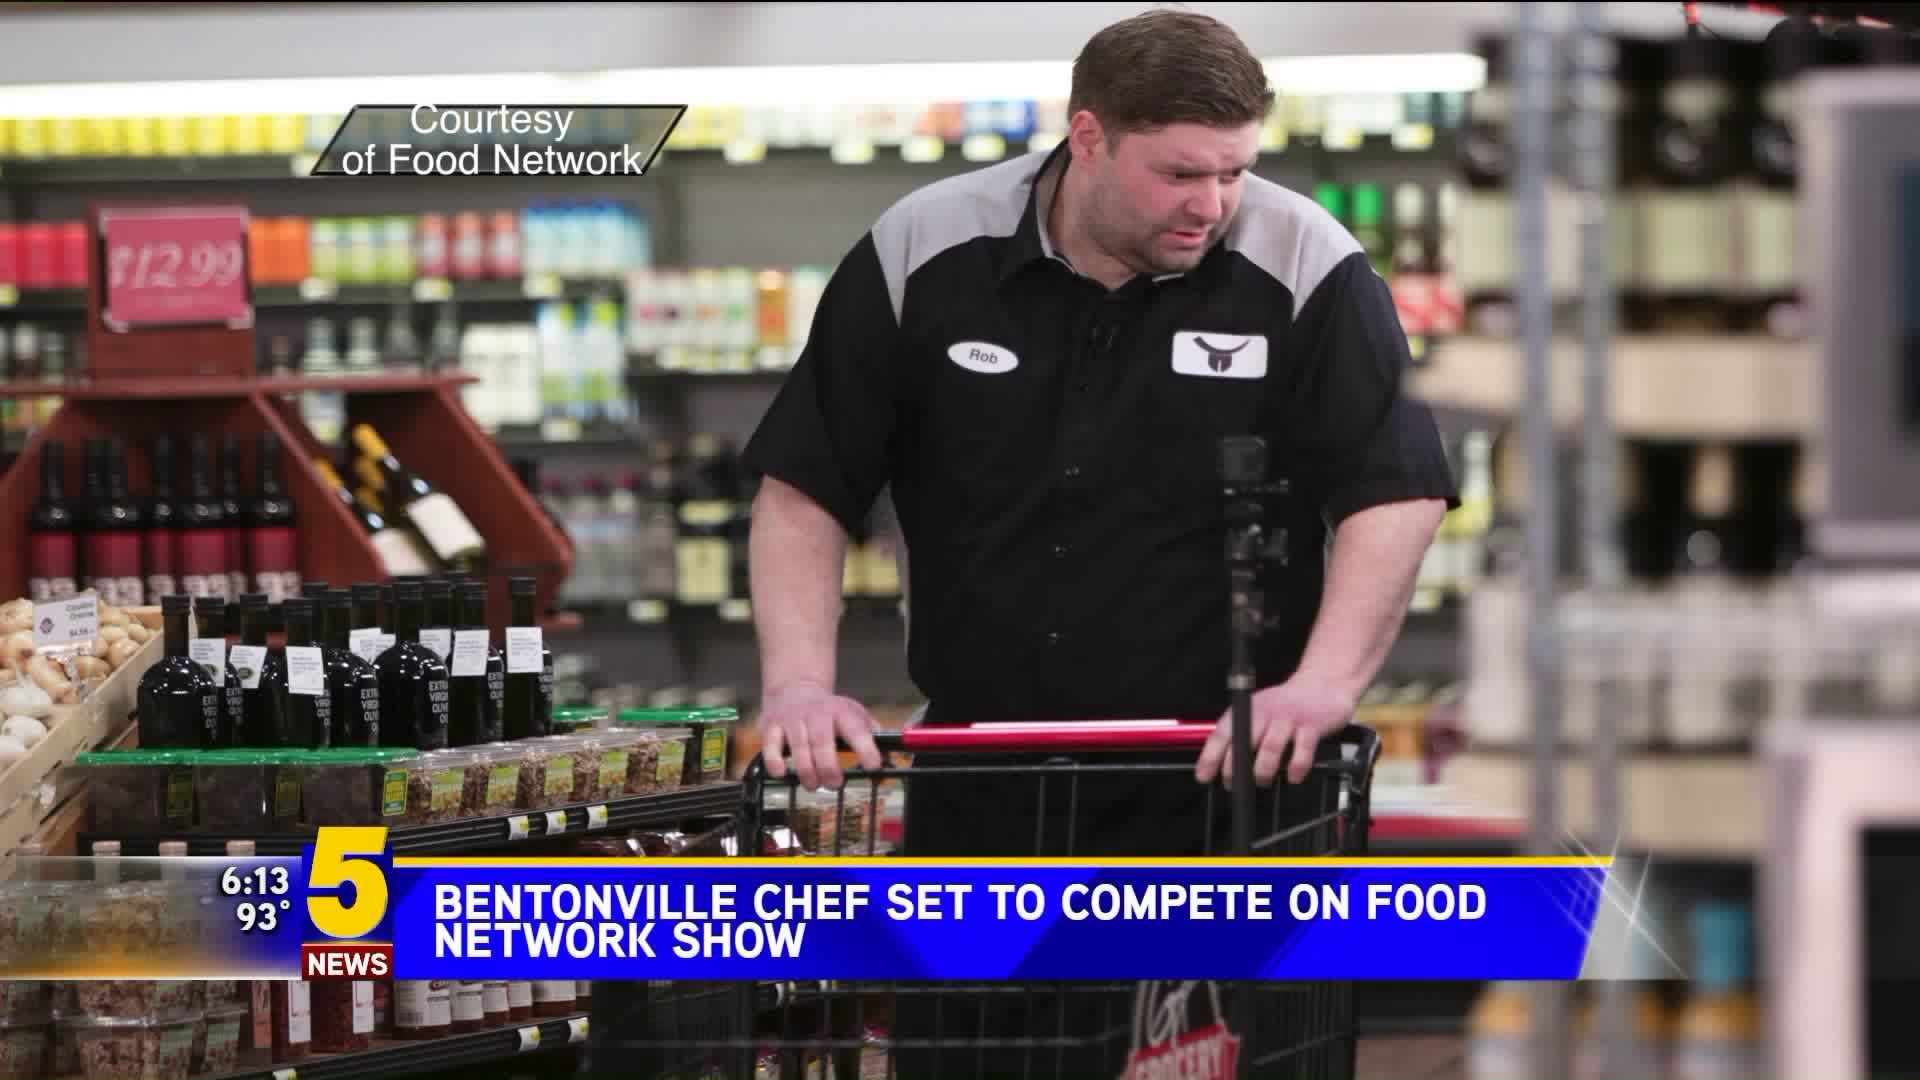 Bentonville Chef Set To Compete On Food Network Show